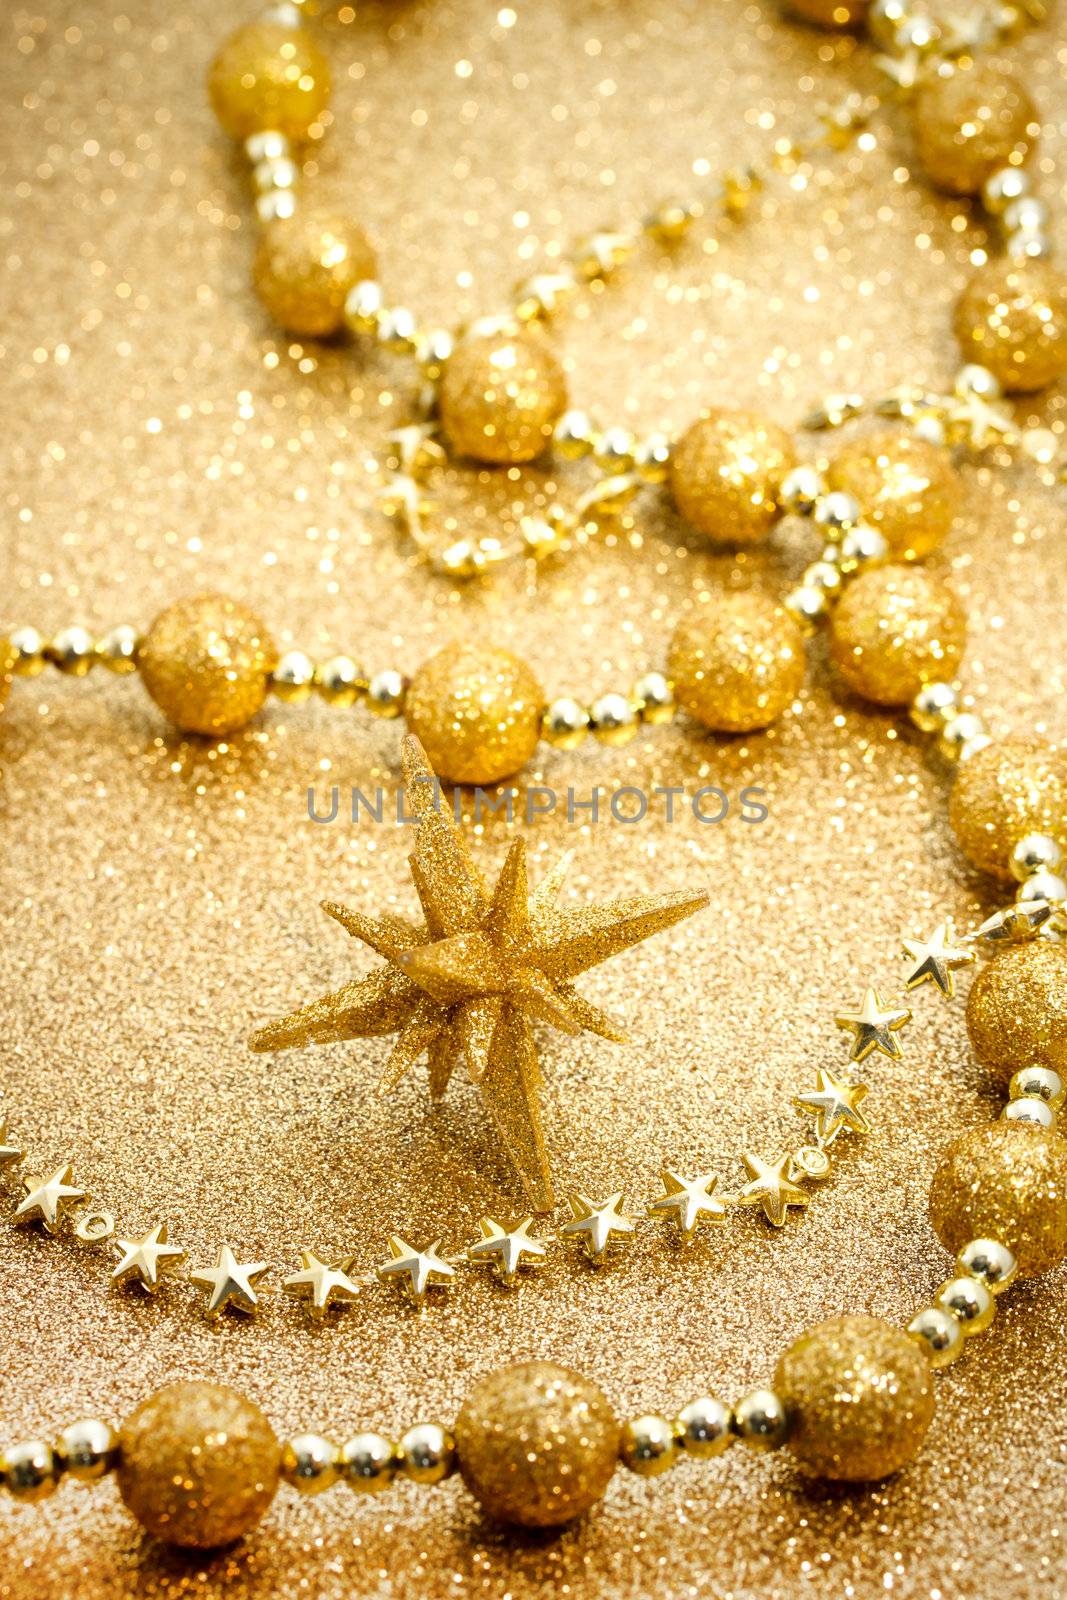 Christmas star with ornaments by melpomene